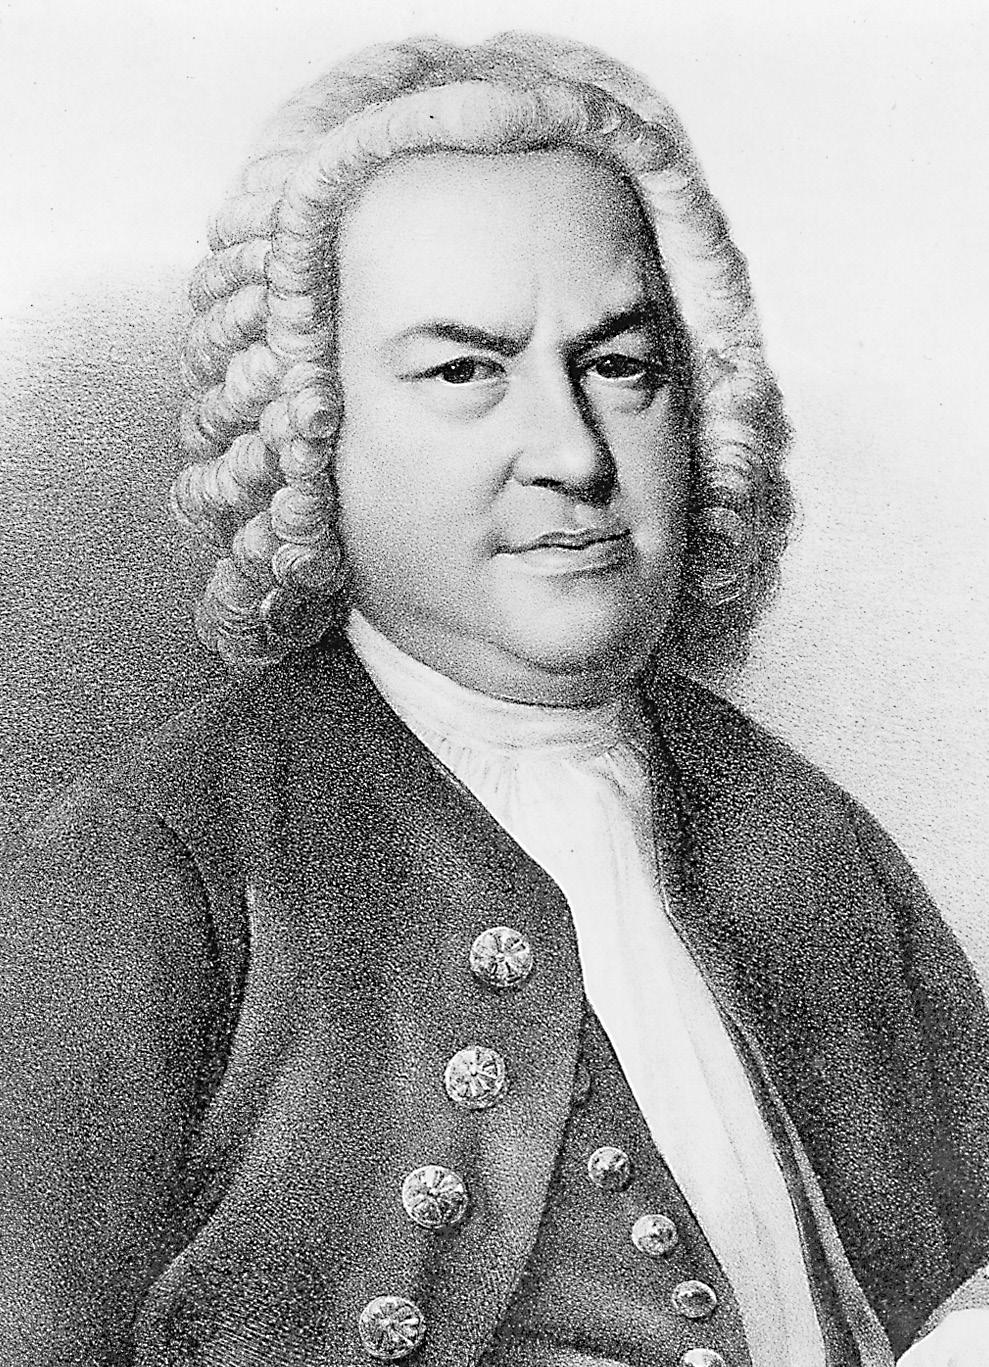 Johann Sebastian Bach The Granger Collection Wilhelm Friedemann Bach 50 Corbis/Bettmann The Granger Collection Carl Philipp Emanuel Bach J.S. Bach s sons, Wilhelm Friedemann and Carl Philipp Emmanuel, who kept Bach s music alive, and provided the context for the famous 1829 revival of the St.